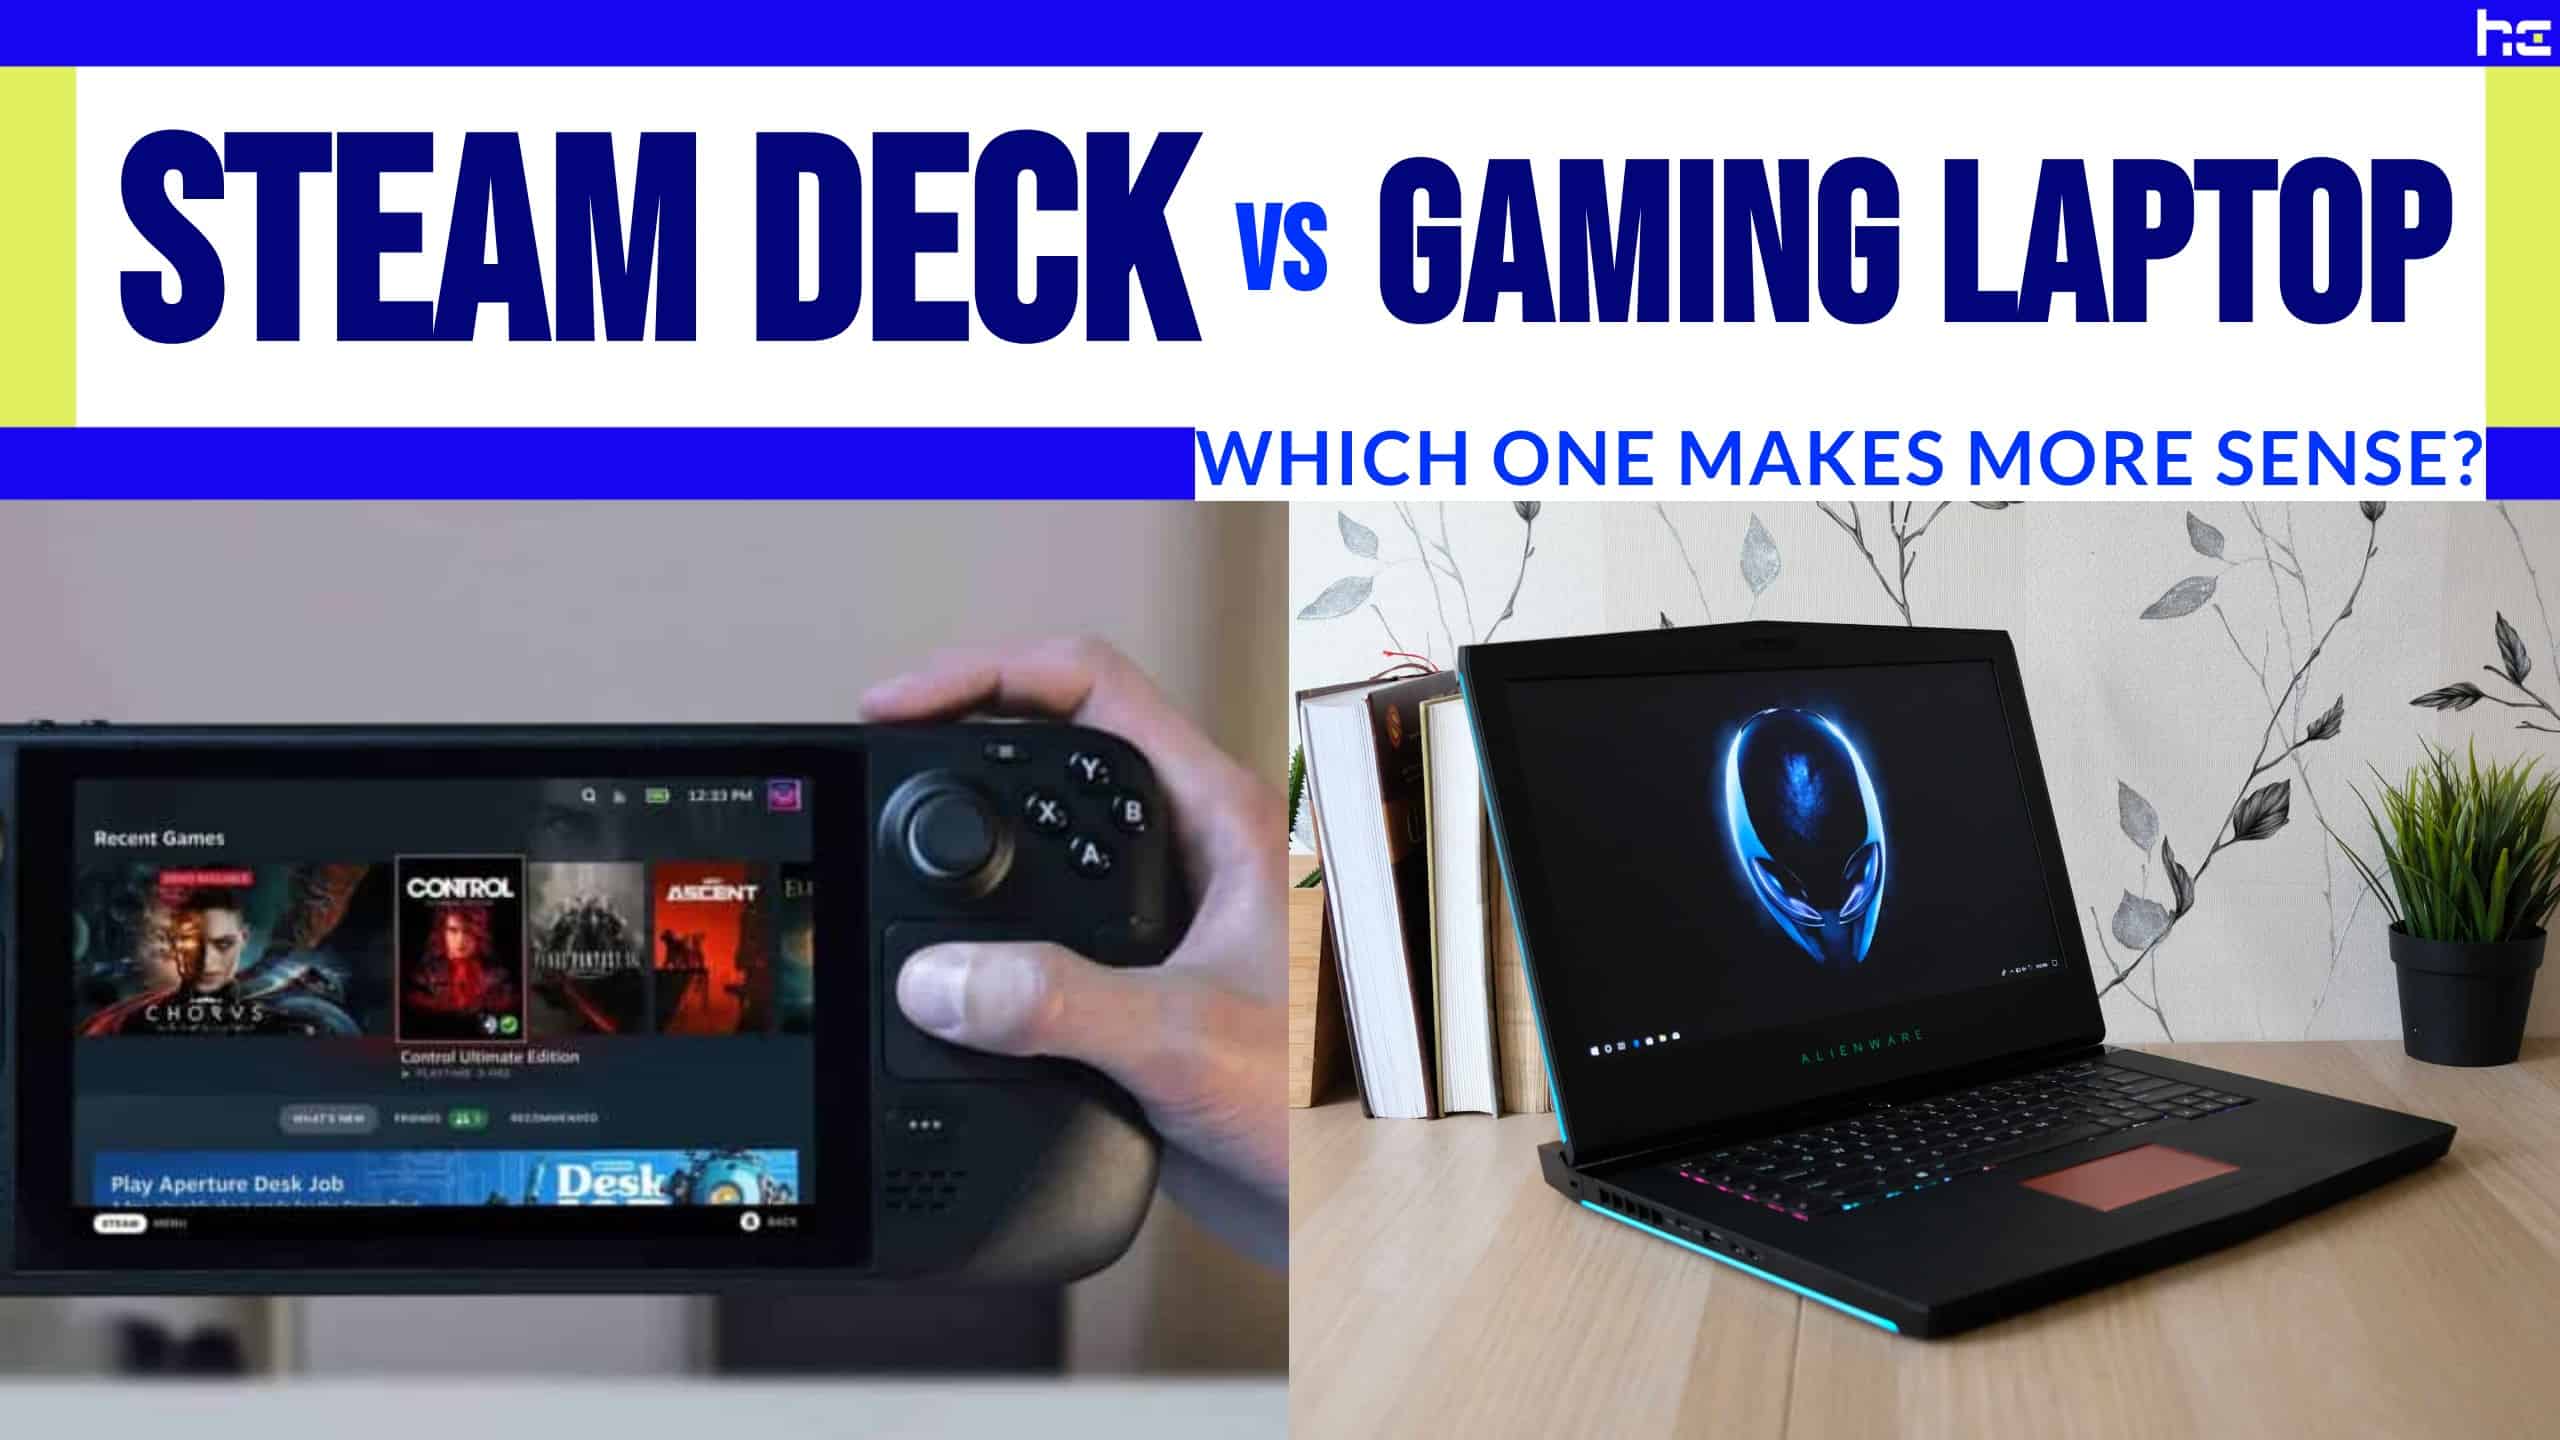 Steam Deck vs Gaming Laptop featured image